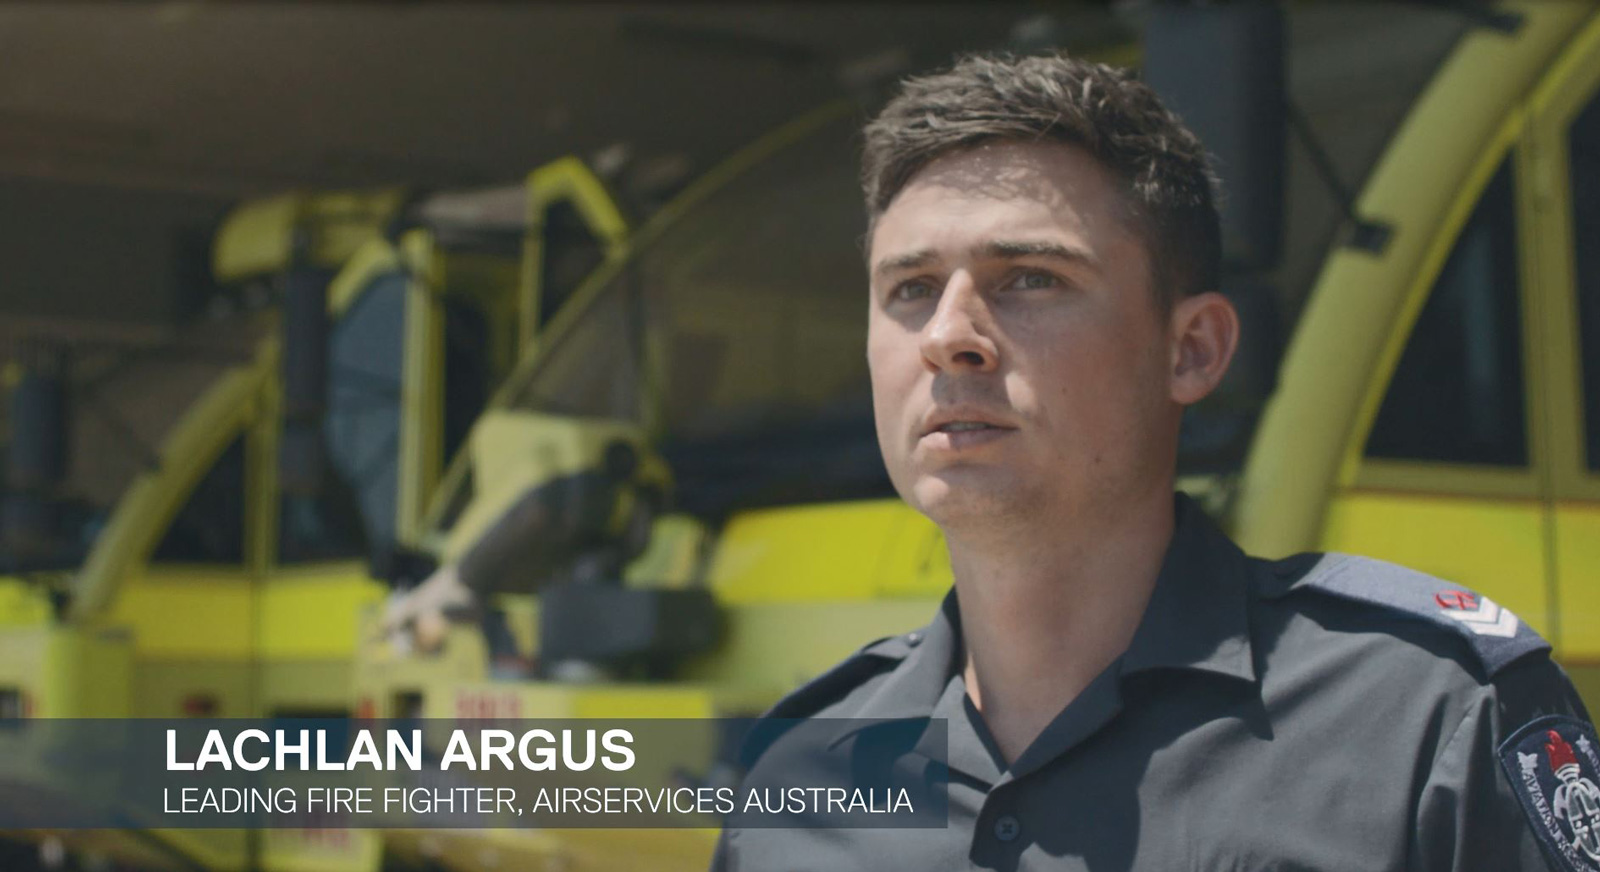 Lachlan Argus is a Leading Fire Fighter with Airservices Australia 